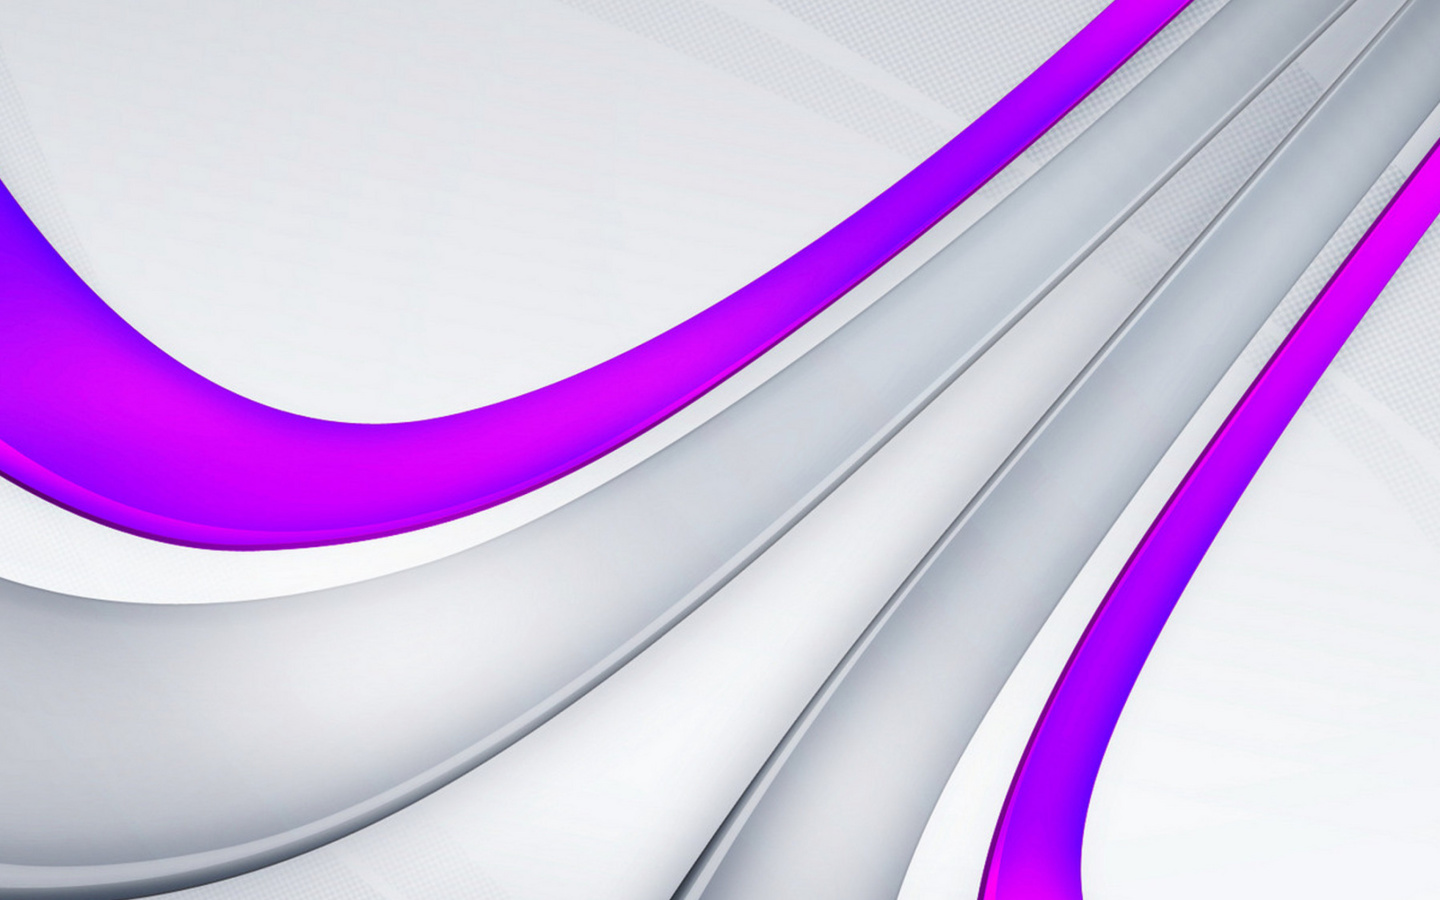 Curved Lines wallpaper 1440x900